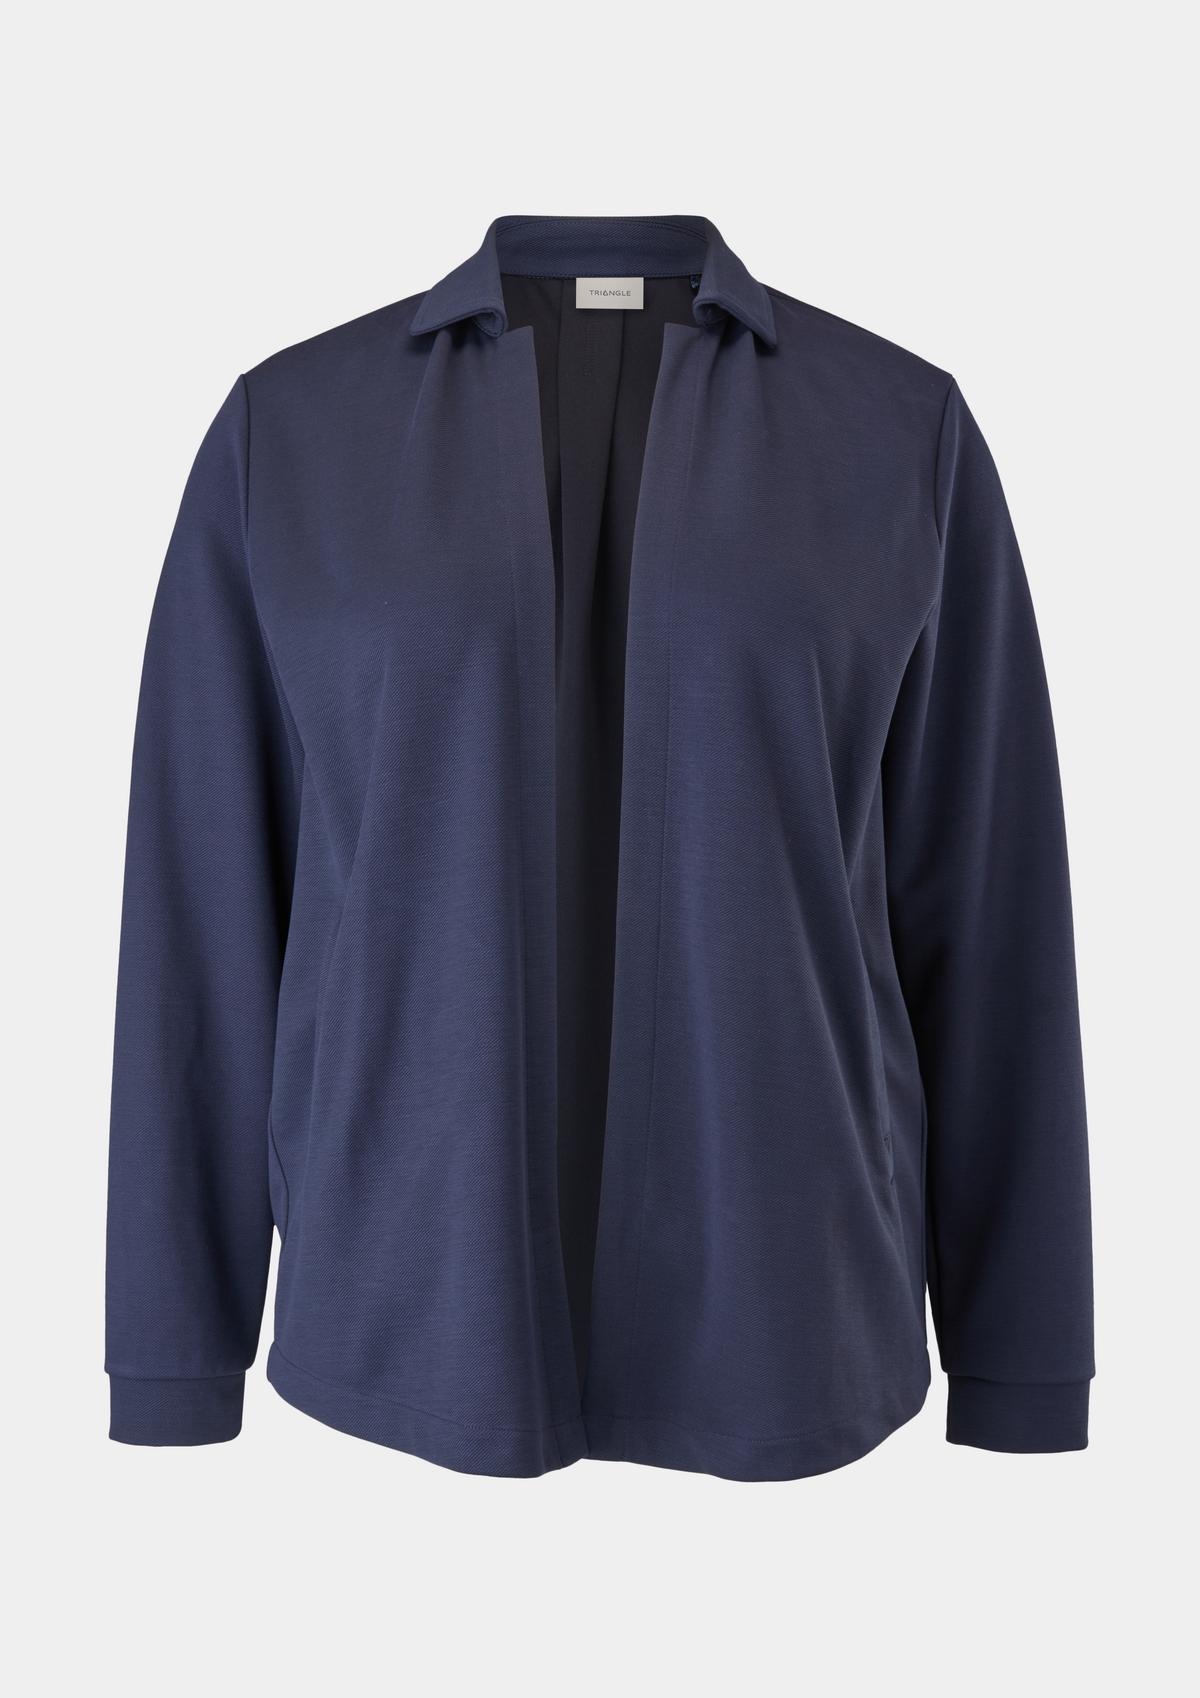 s.Oliver Sweatshirt jacket with a turn-down collar